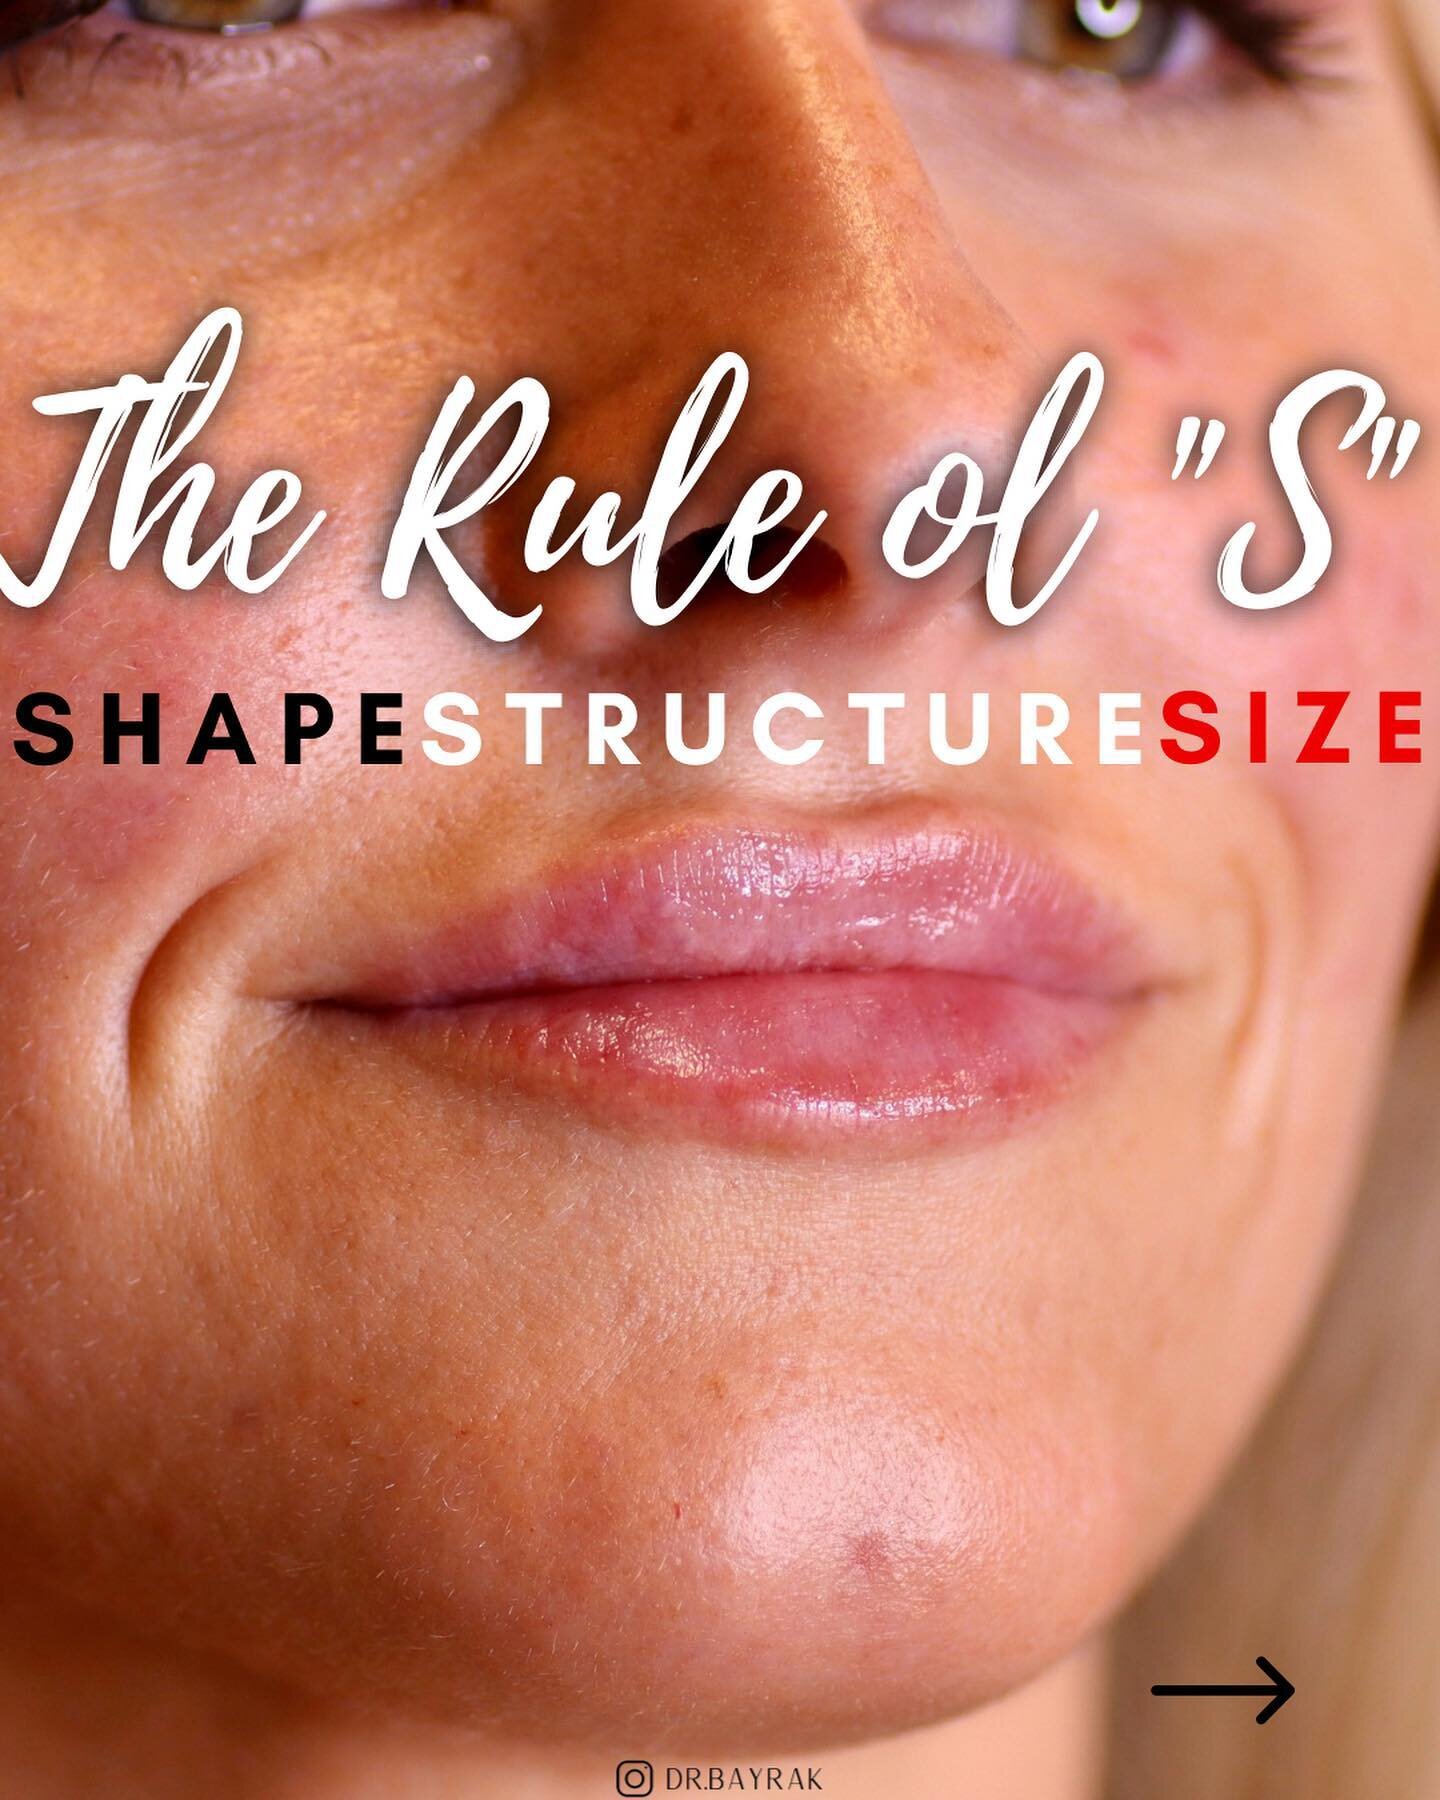 Lip filler is very rarely only about size which is why I like to take credit for what I call &ldquo;the rule of S,&rdquo; where shape and structure are of equal, if not more, importance. Just increasing the volume of the lip without ensuring great st